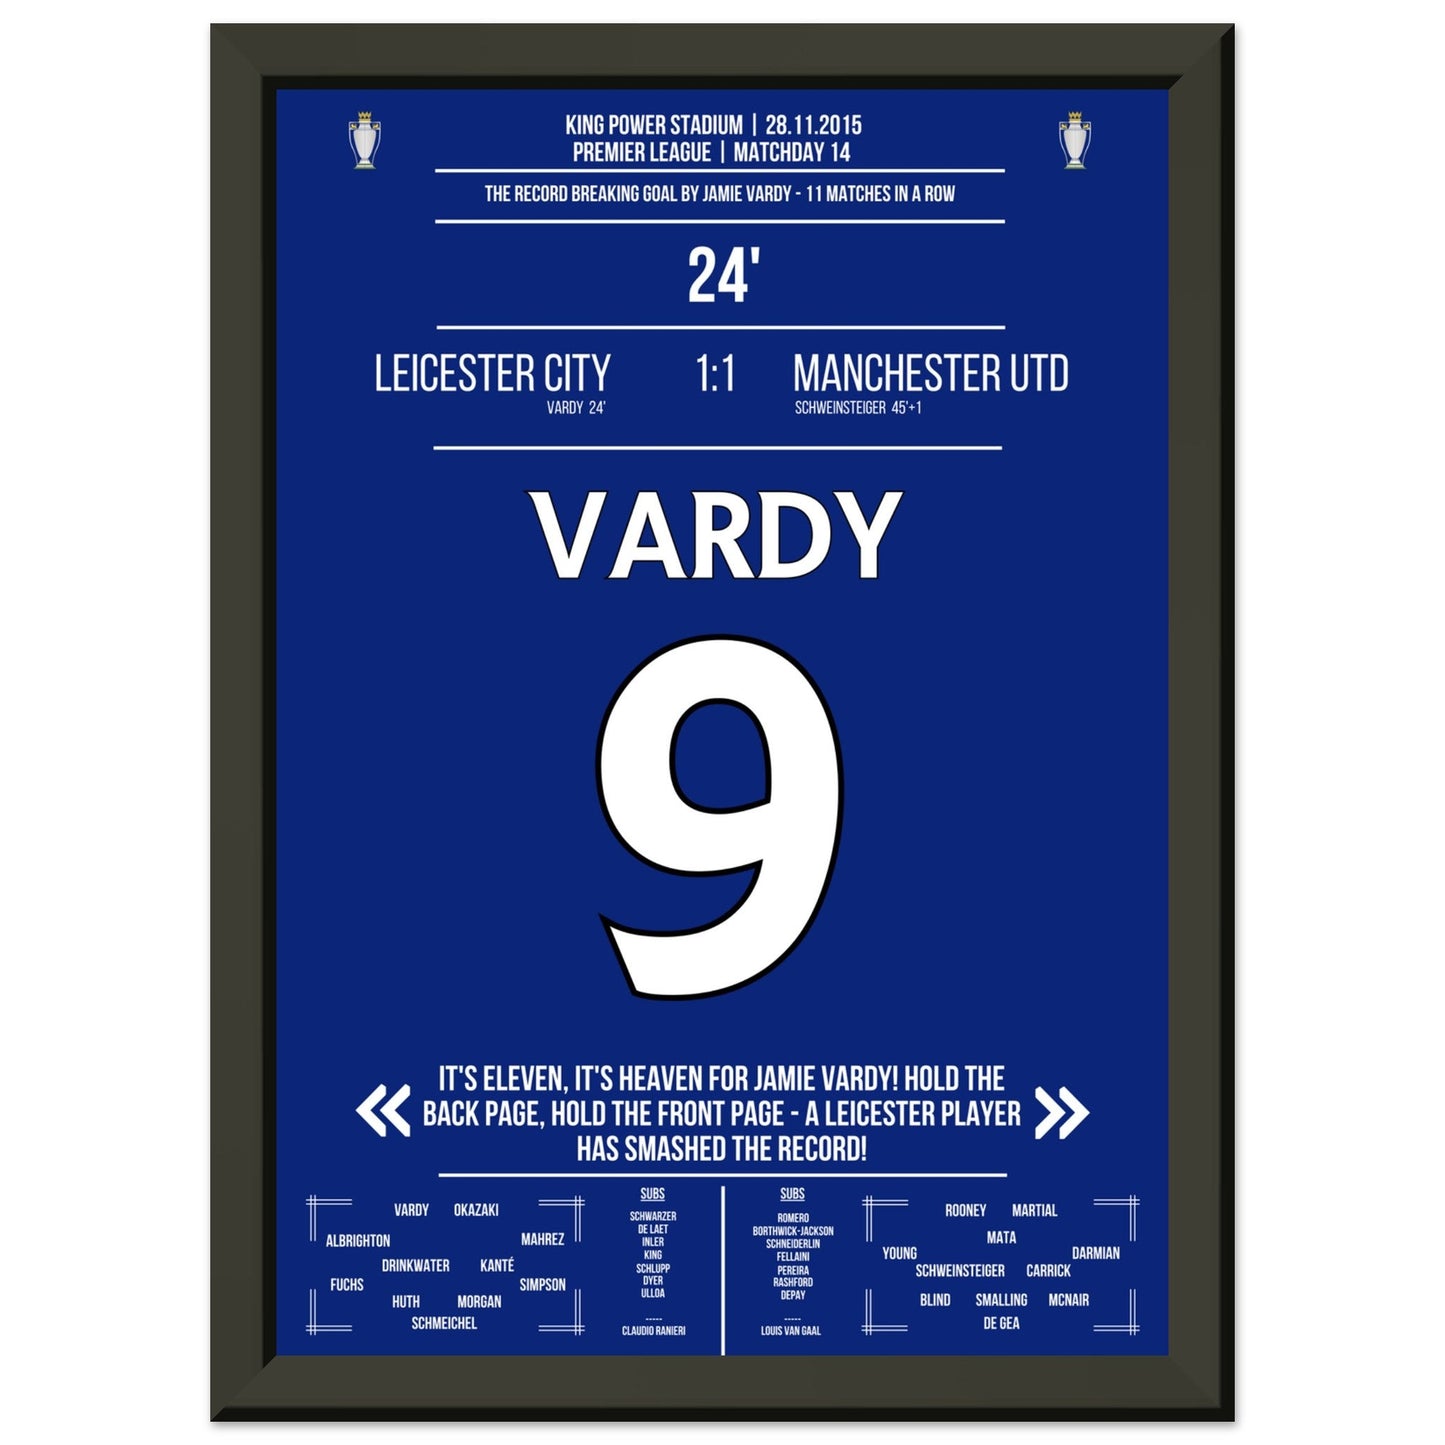 Vardy scores in the 11th game in a row and breaks the Premier League record